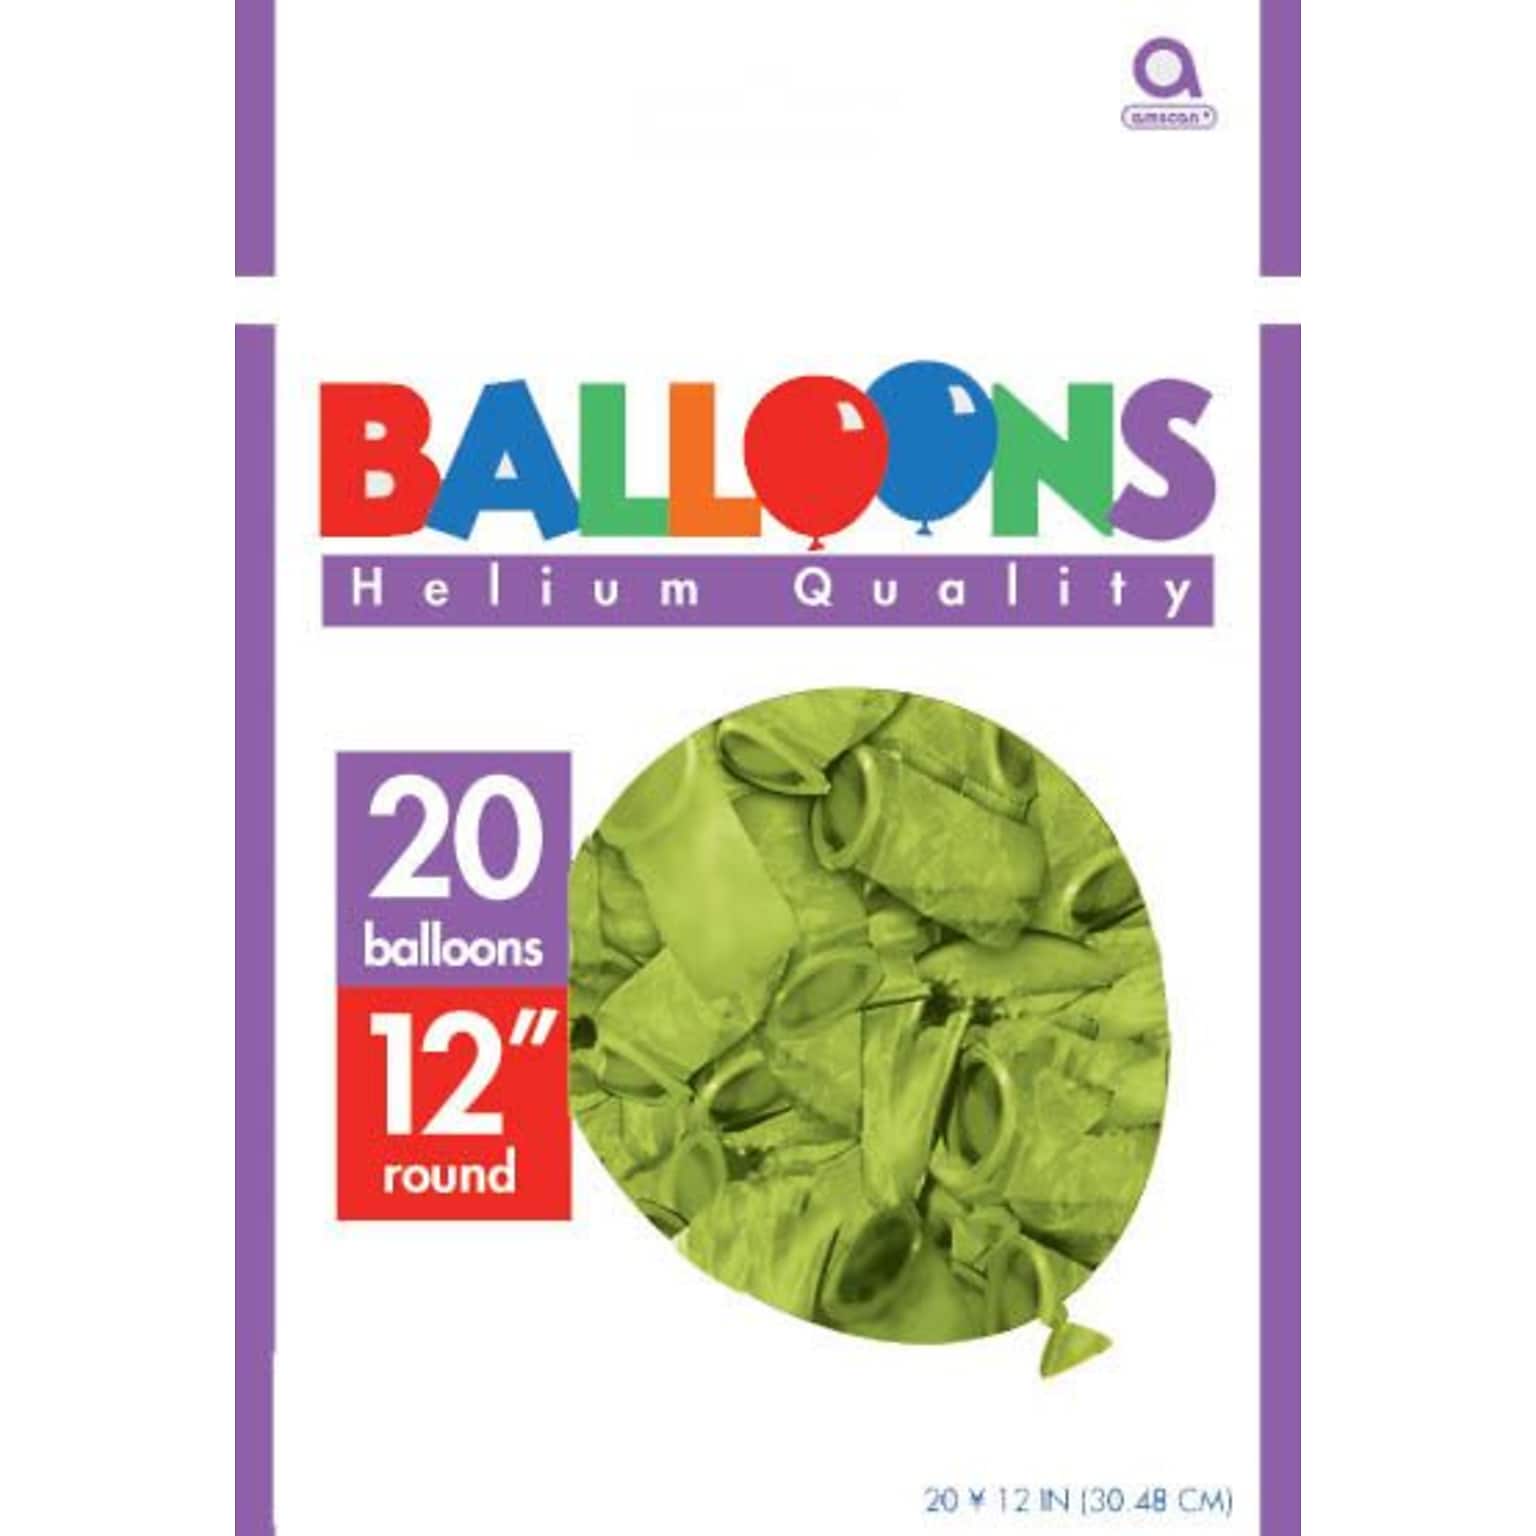 Amscan Solid Color Packaged Latex Balloons, 12, Kiwi, 18/Pack, 15 Per Pack (113252.53)